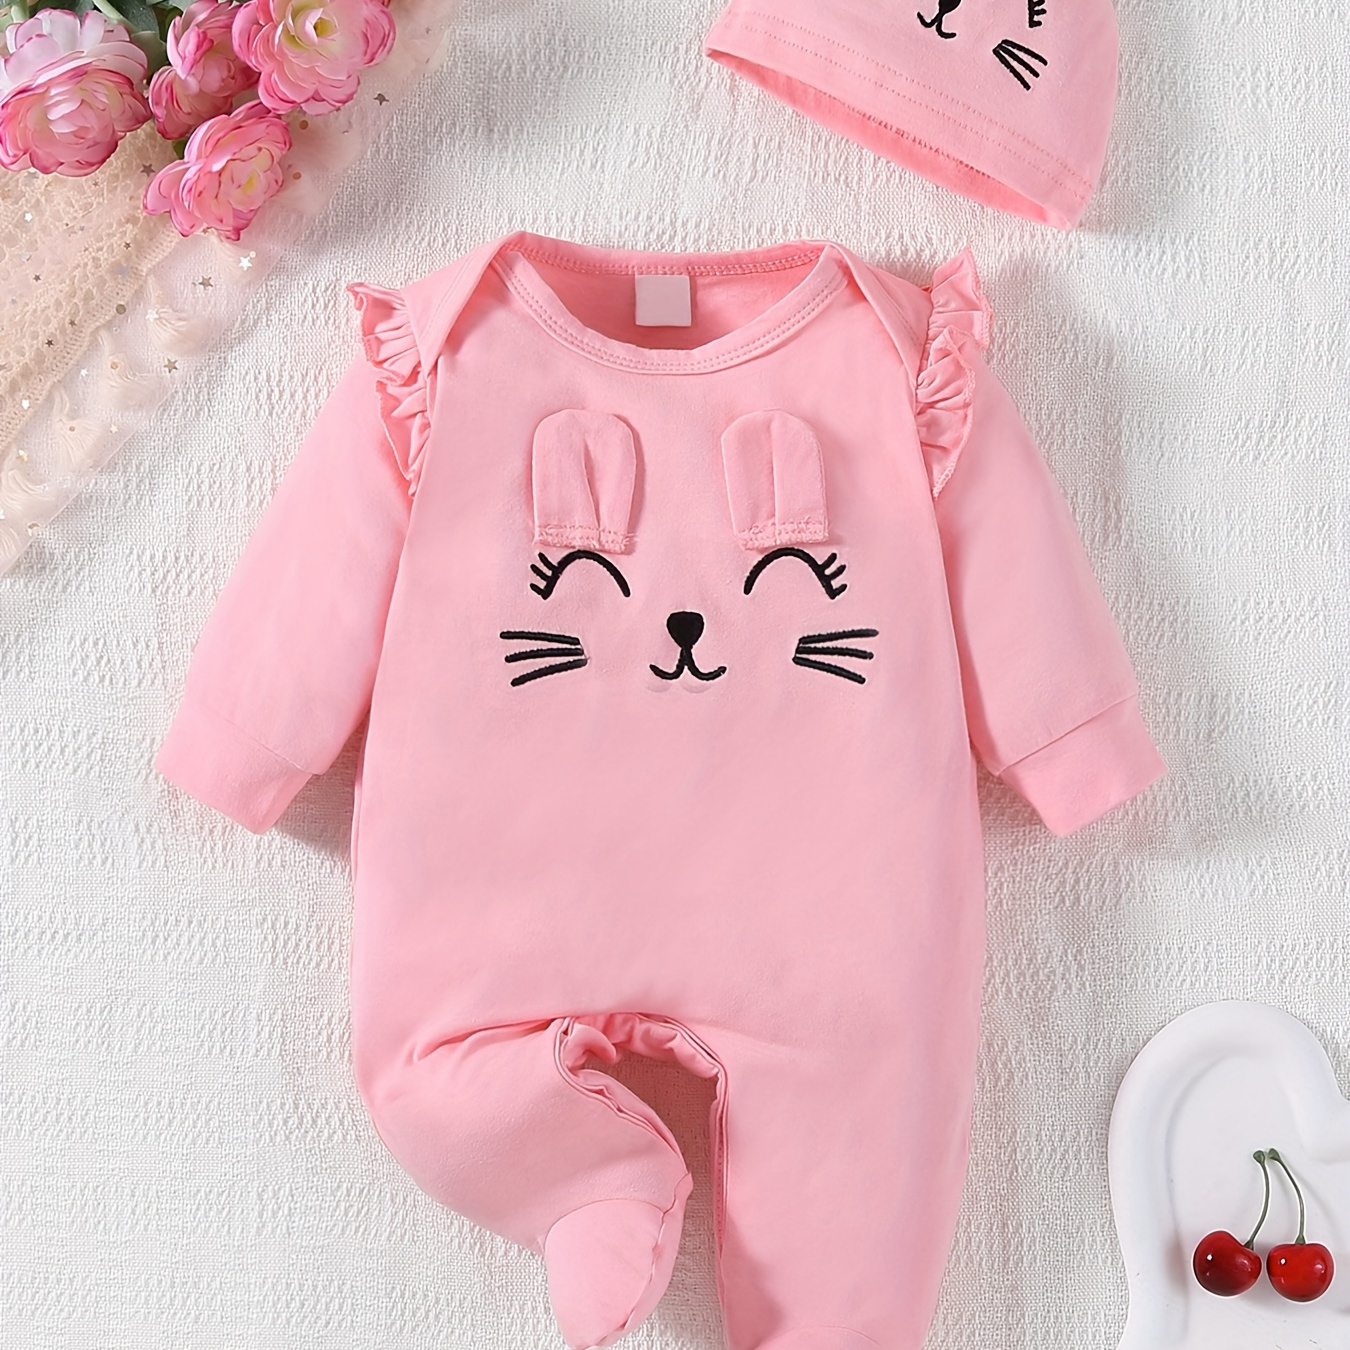 

New Born Baby's Happy Bunny Print Cotton Footed Bodysuit, Casual Long Sleeve Romper, Toddler & Infant Girl's Onesie For Spring Fall, As Gift